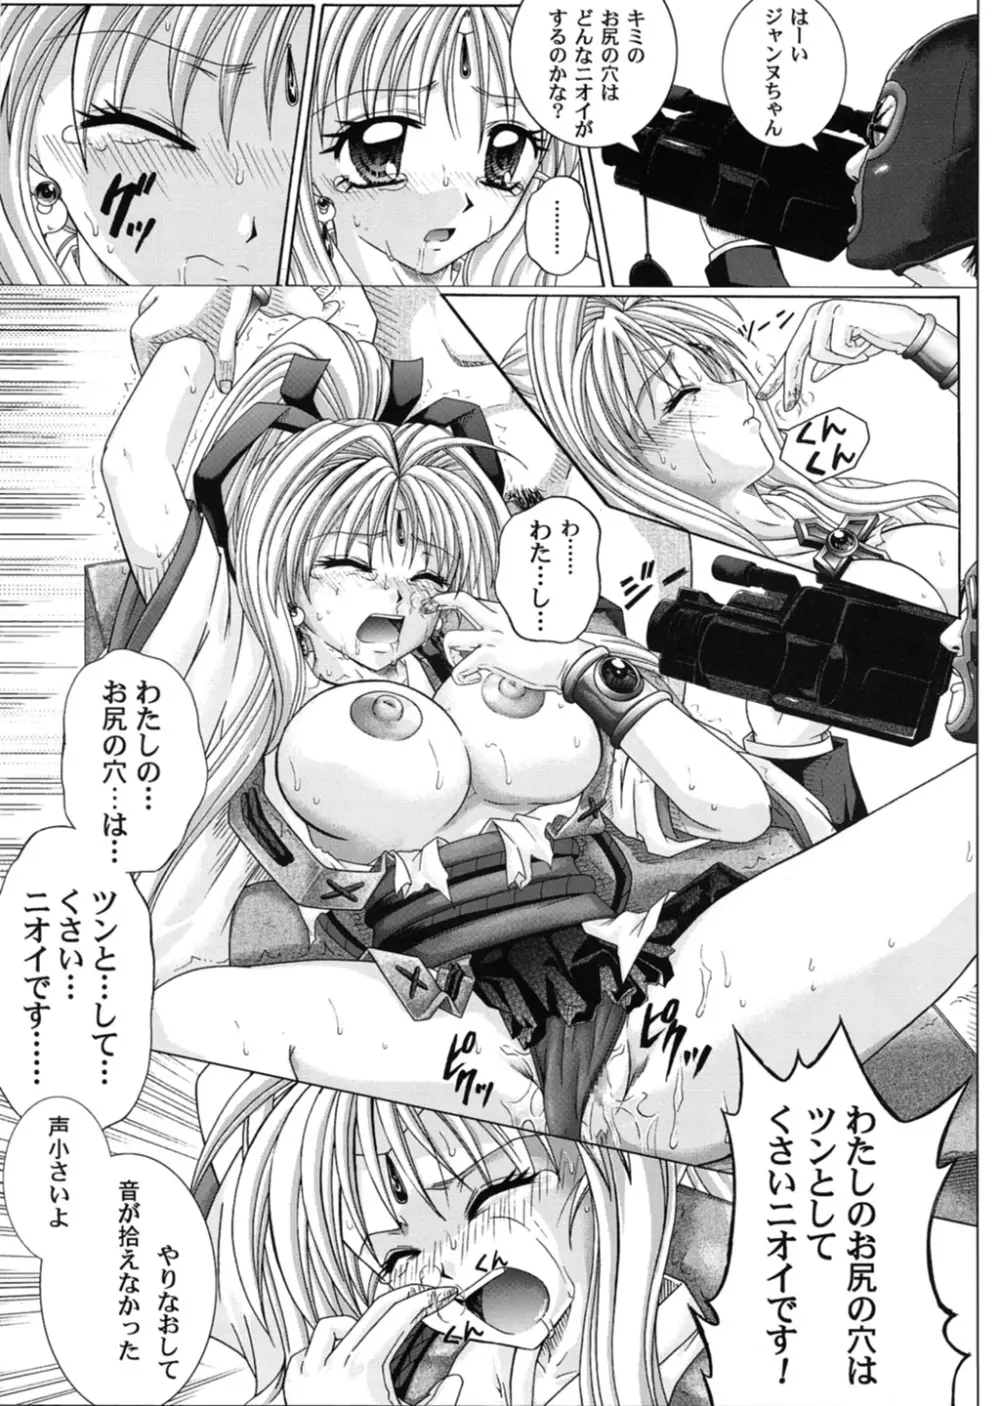 ROGUE SPEAR 3 44ページ